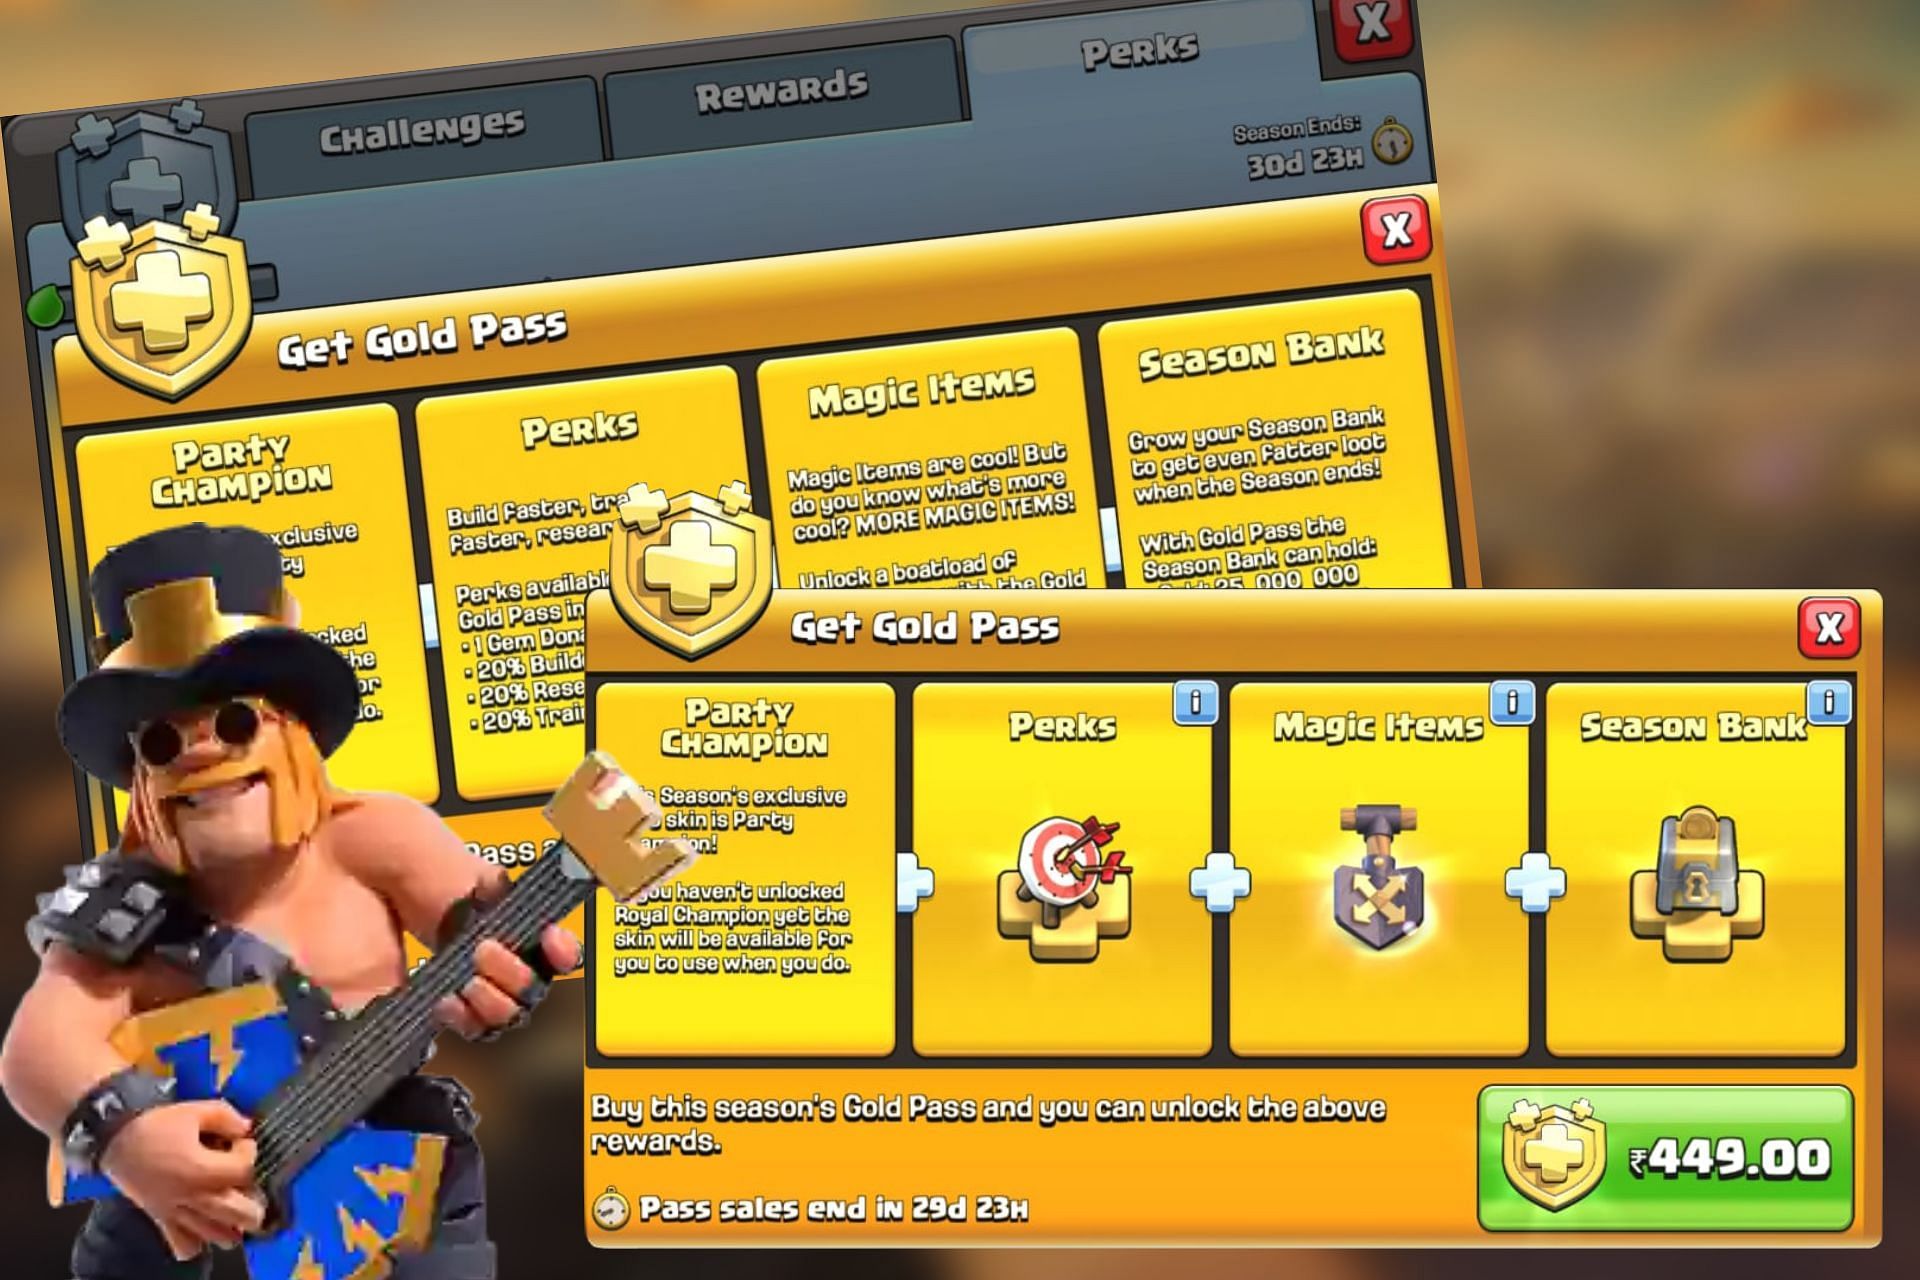 Unlock the August Gold Pass Rewards in Clash of Clans